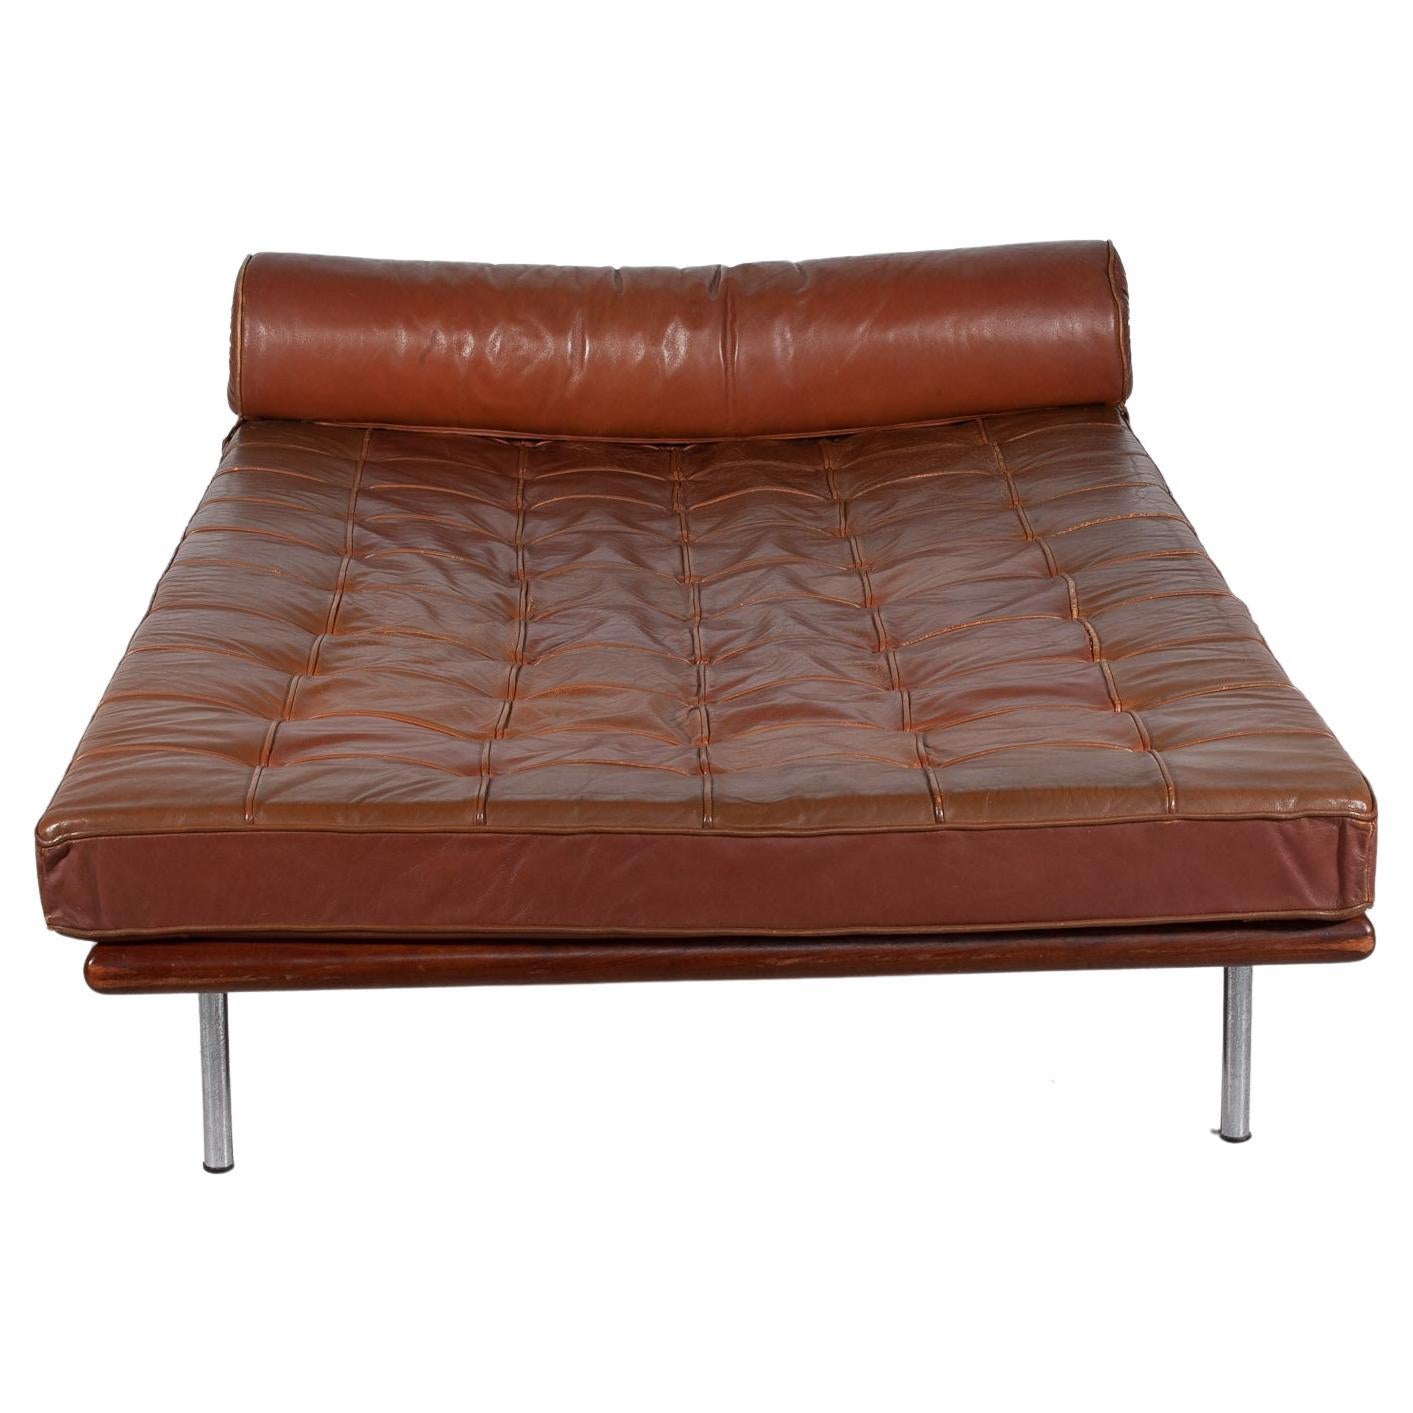 Brown Leather Barcelona Daybed by Ludwig Mies van der Rohe, für Knoll